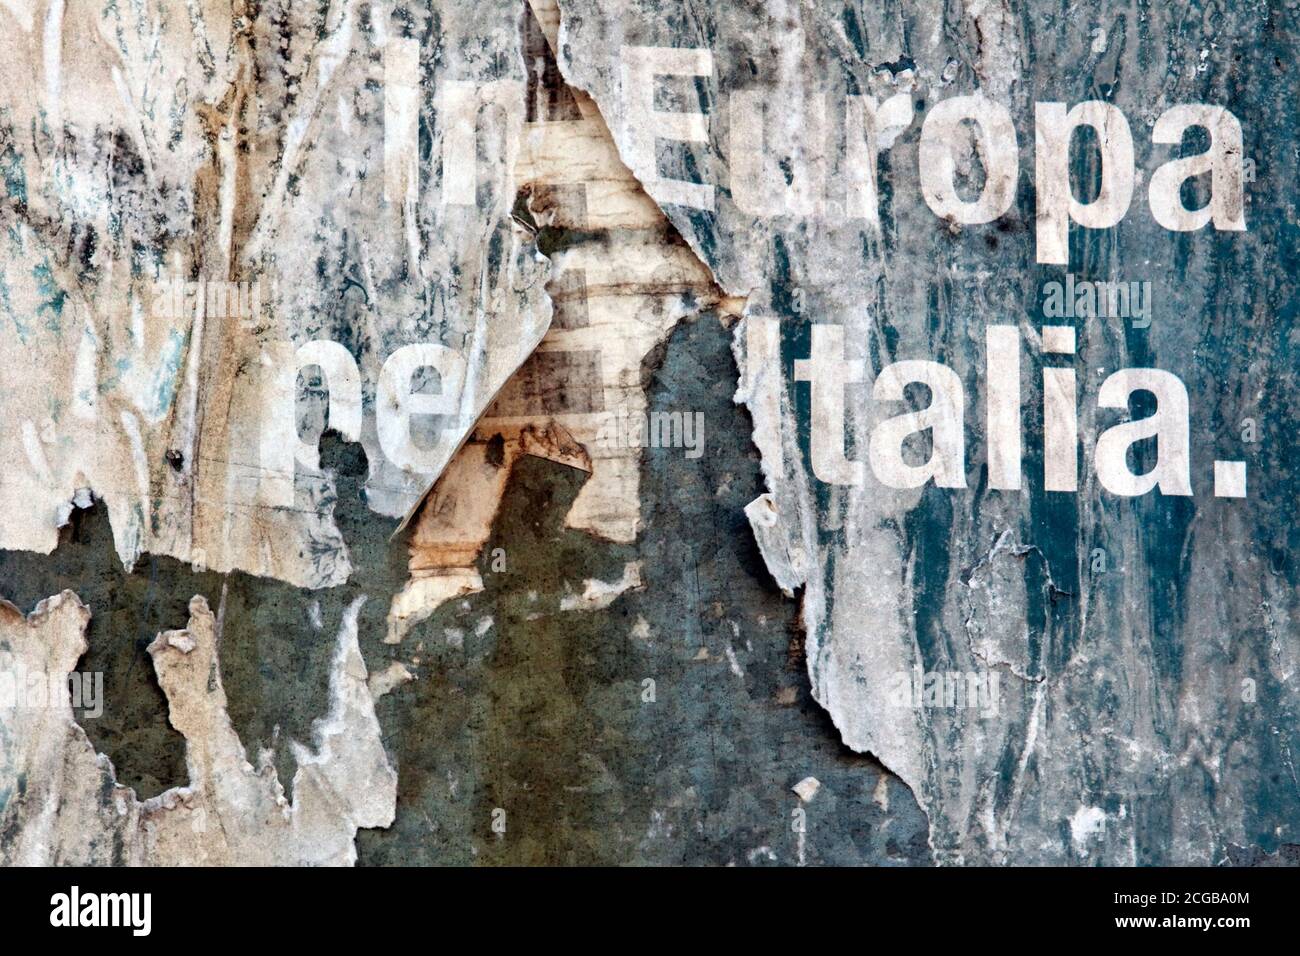 CAPRAROLA - Remains of a local election poster for a pro european party Stock Photo